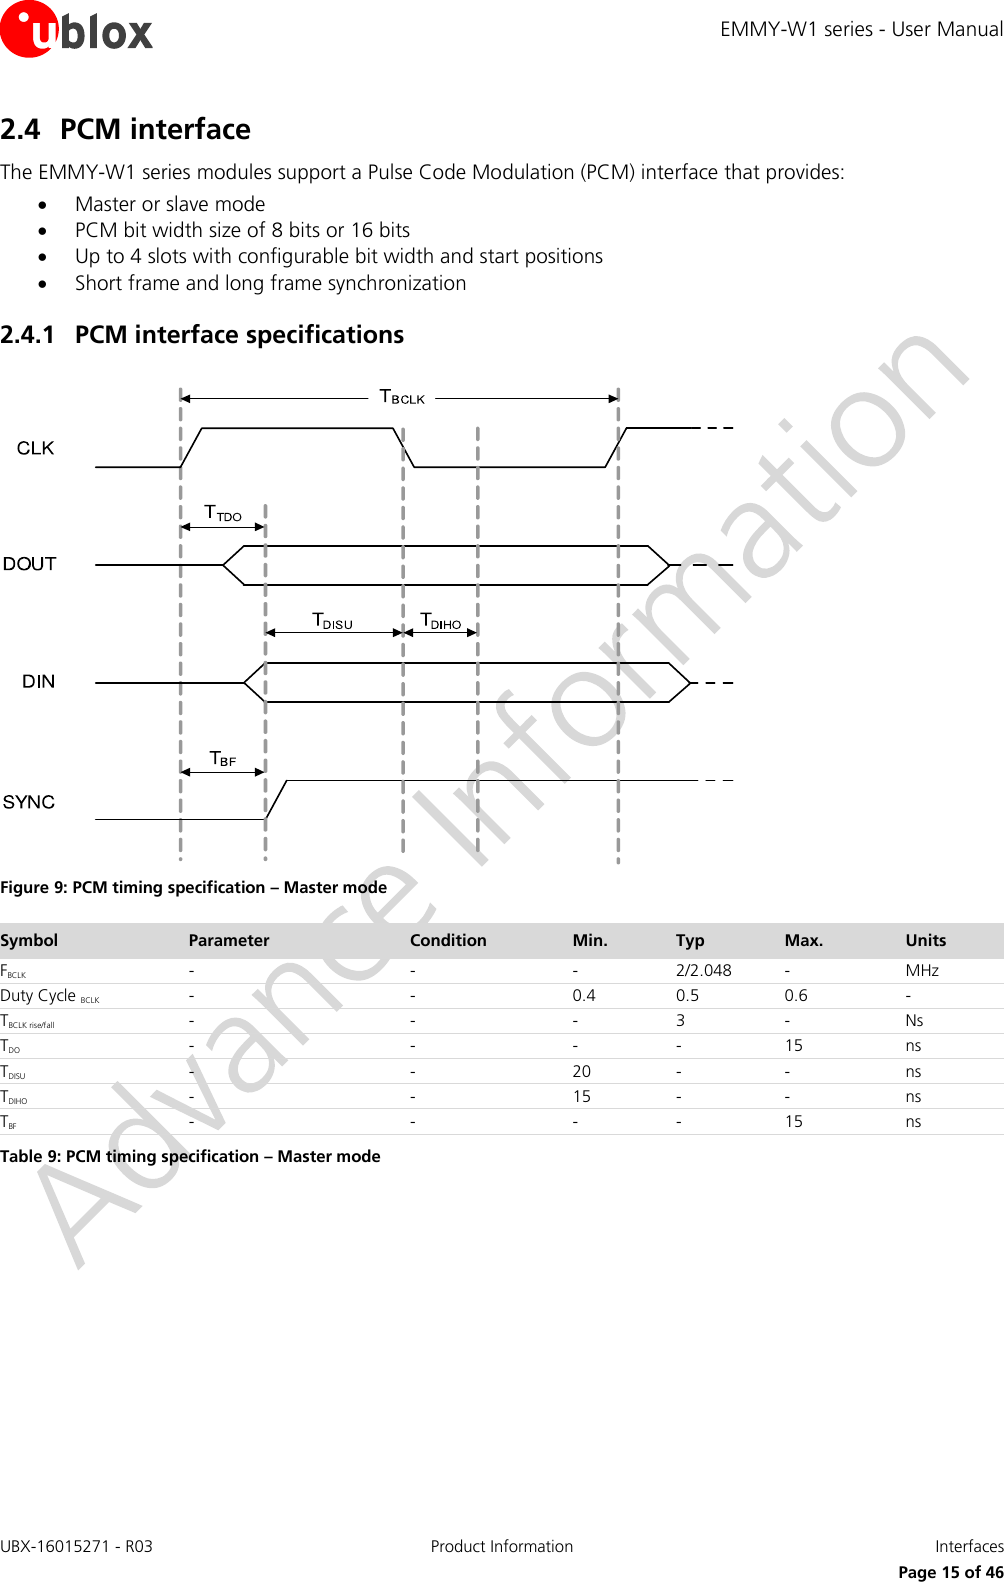 EMMY-W1 series - User Manual UBX-16015271 - R03 Product Information  Interfaces     Page 15 of 46 2.4 PCM interface The EMMY-W1 series modules support a Pulse Code Modulation (PCM) interface that provides:  Master or slave mode  PCM bit width size of 8 bits or 16 bits  Up to 4 slots with configurable bit width and start positions  Short frame and long frame synchronization 2.4.1 PCM interface specifications   Figure 9: PCM timing specification – Master mode  Symbol Parameter Condition Min.        Typ Max. Units FBCLK - - - 2/2.048 - MHz Duty Cycle BCLK - - 0.4 0.5 0.6 - TBCLK rise/fall - - - 3 - Ns TDO - - - - 15 ns TDISU - - 20 - - ns TDIHO - - 15 - - ns TBF - - - - 15 ns Table 9: PCM timing specification – Master mode 